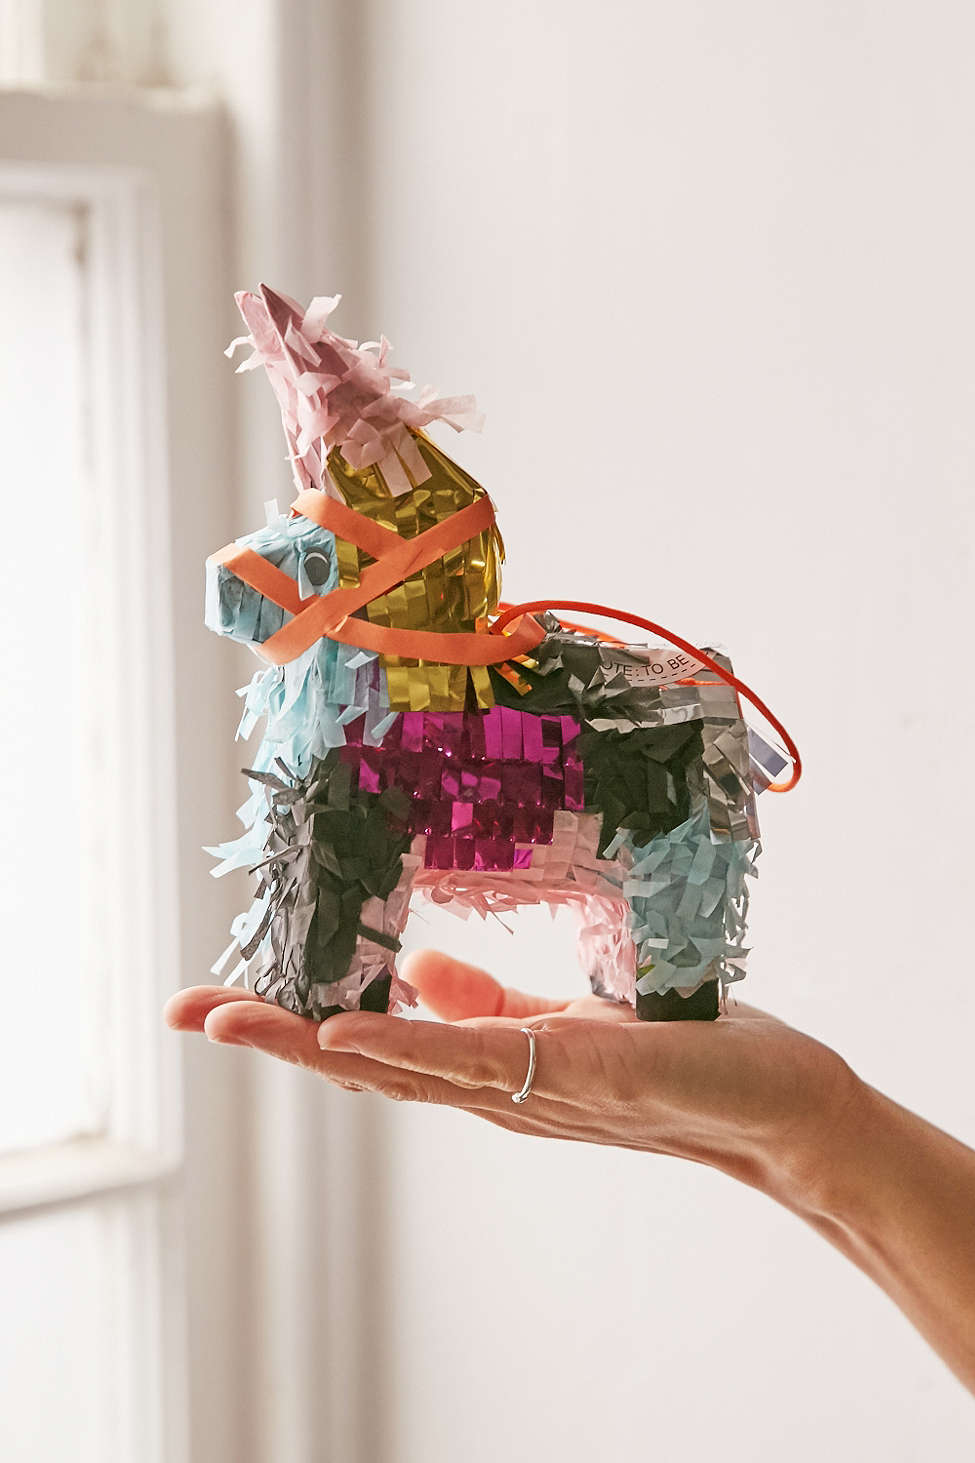 Donkey Piñata | Any one of these finds from Urban Outfitters could make your next get summer together the party of the century.